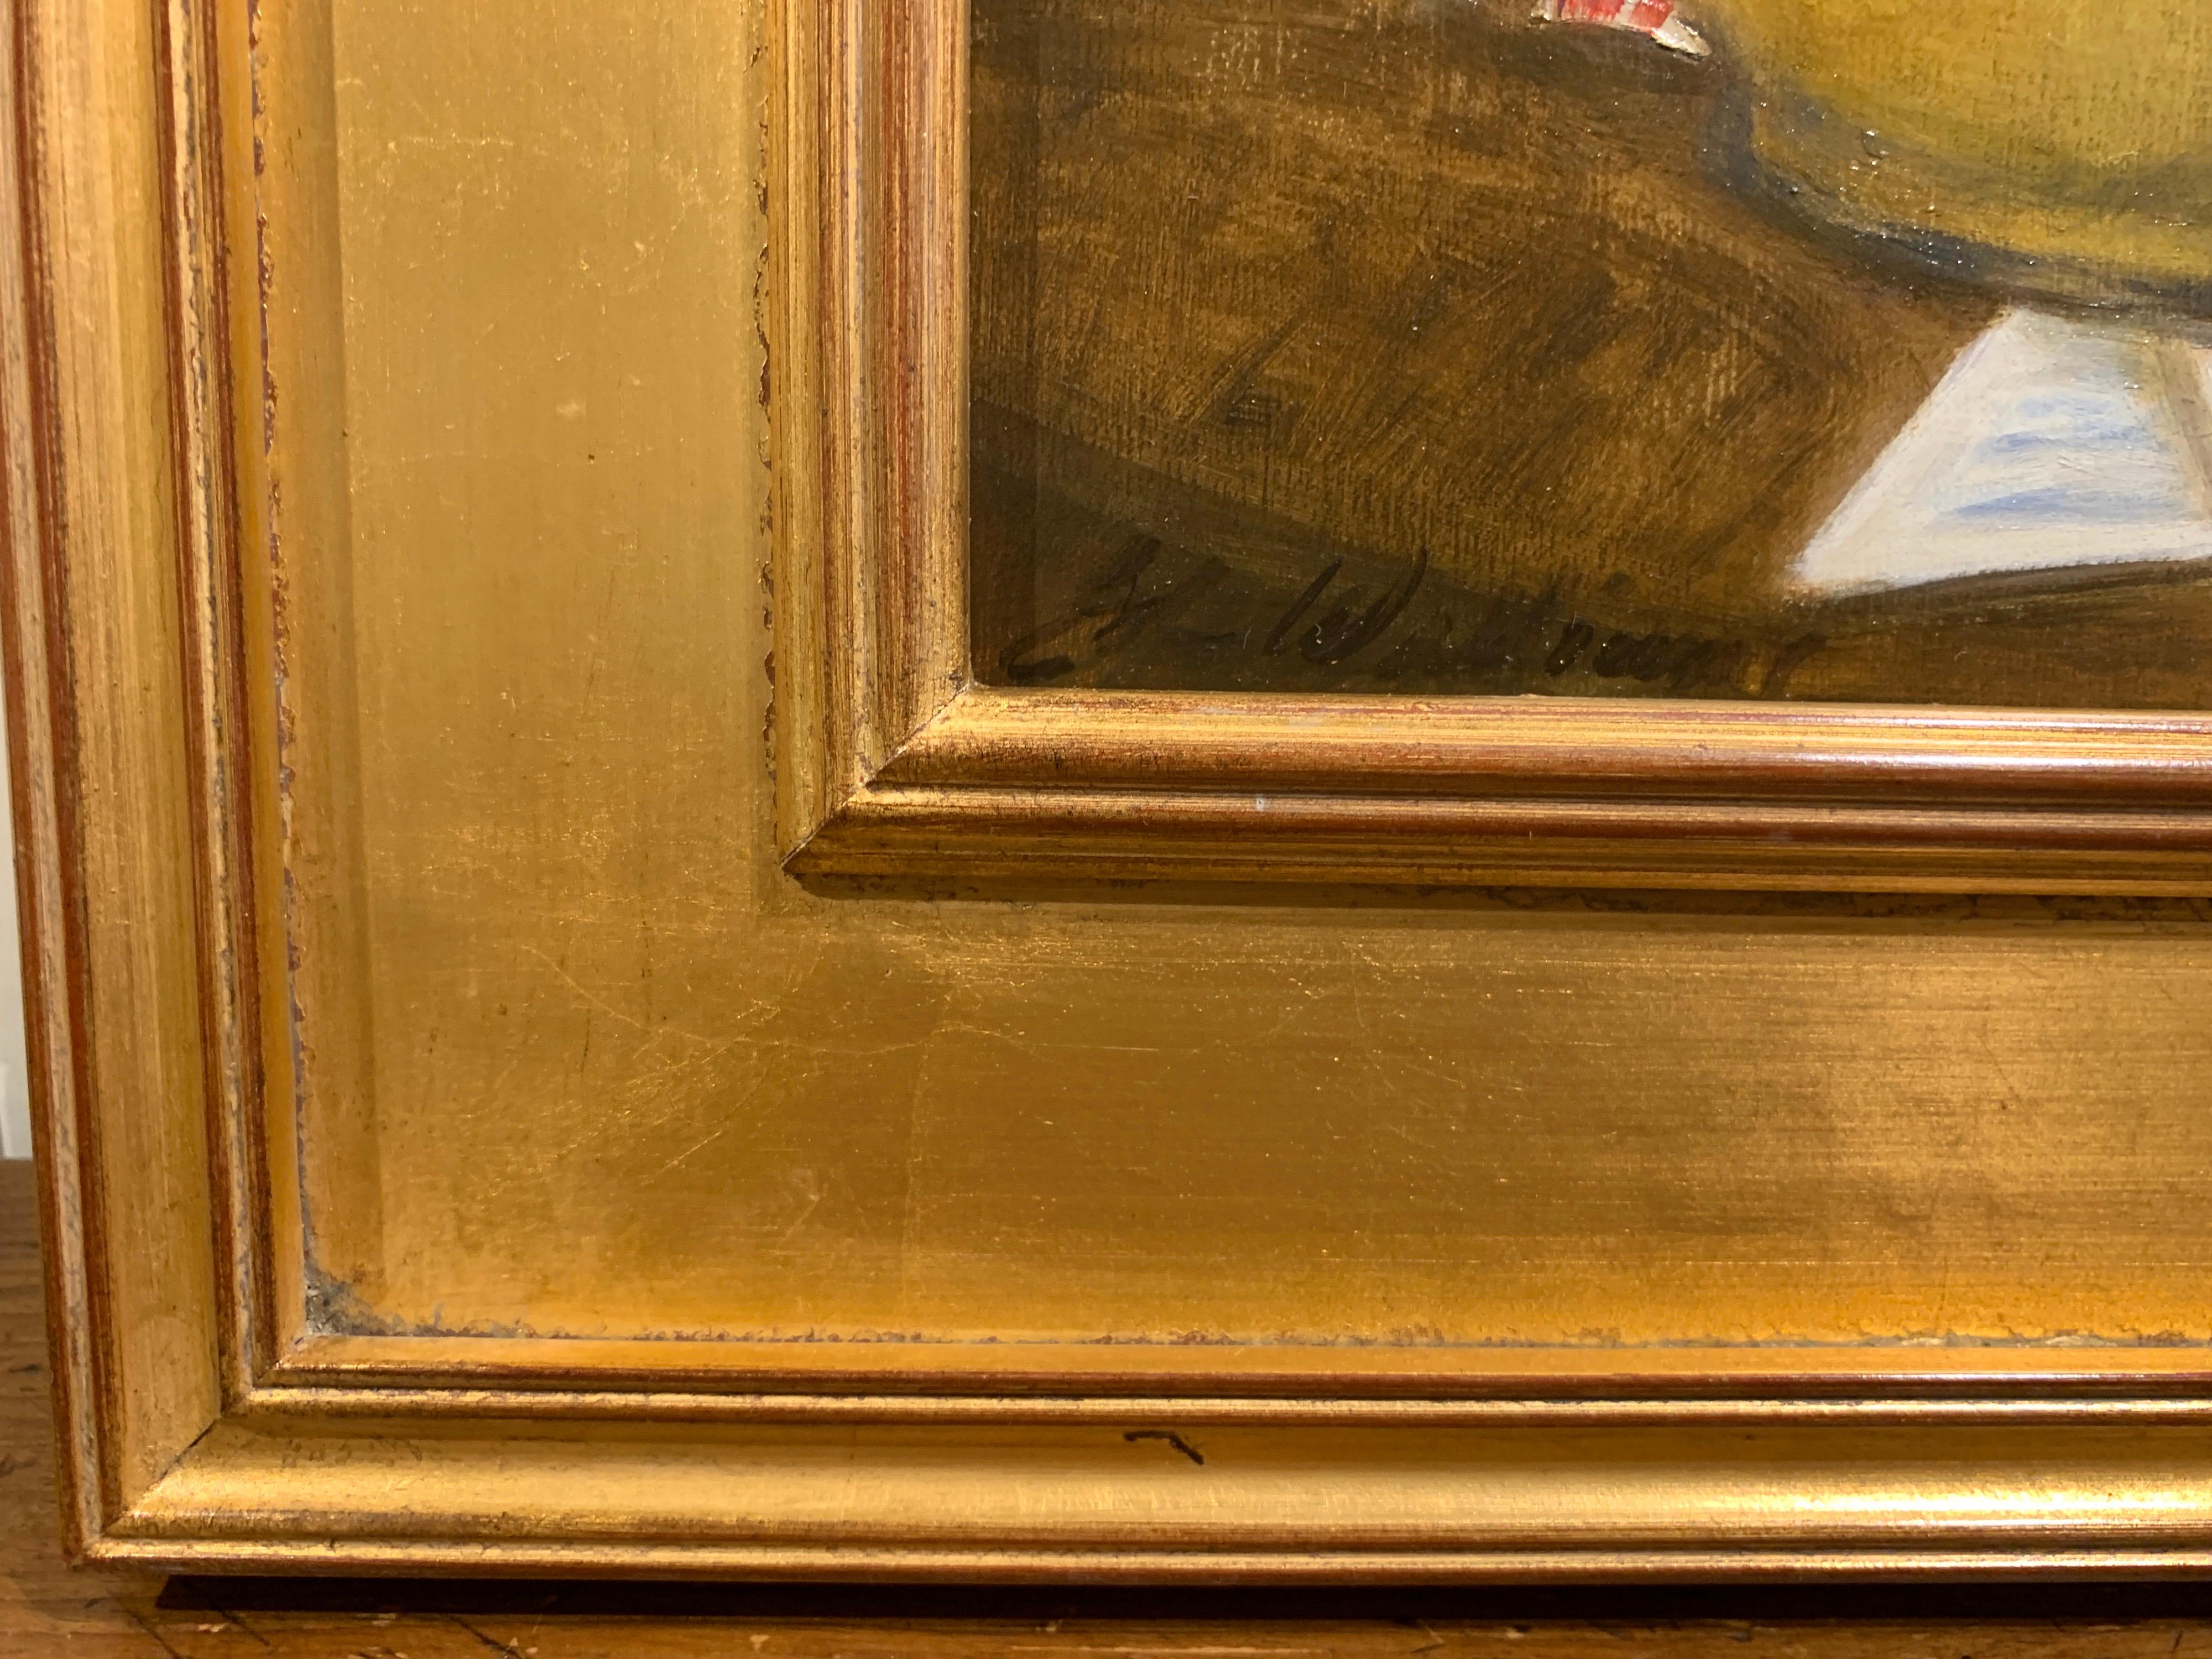 Ginny demonstrates here both her talent as a colorist and her understanding of Old Masters' techniques. Set inside a gold frame, this small format is signed lower right. Without its frame, this oil on canvas painting measures 11 inches high x 14